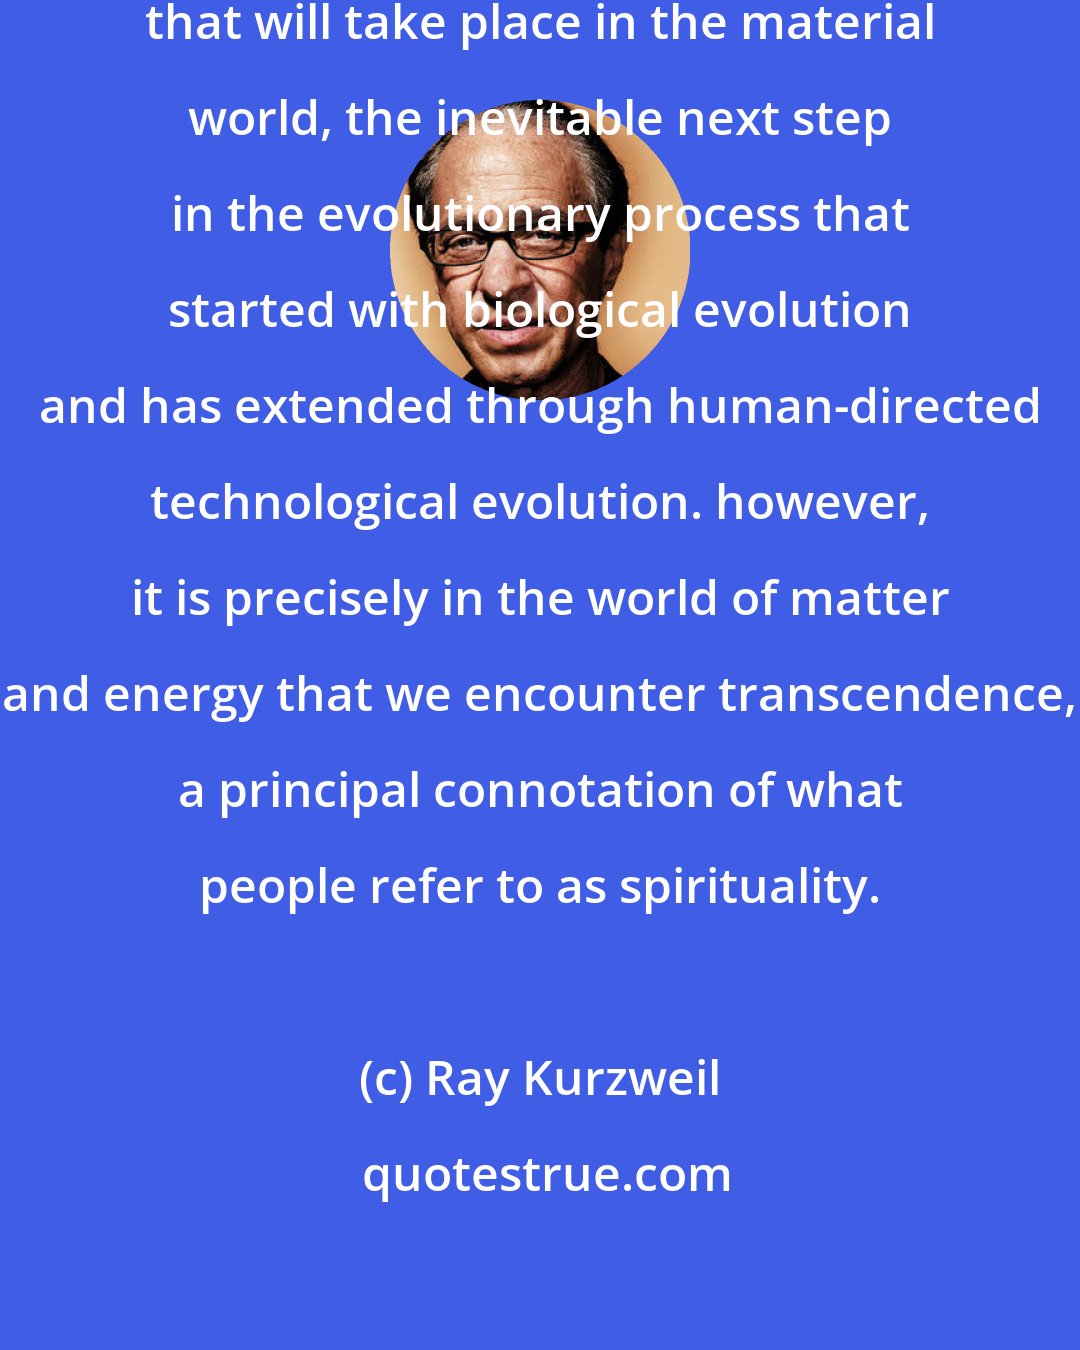 Ray Kurzweil: The Singularity denotes an event that will take place in the material world, the inevitable next step in the evolutionary process that started with biological evolution and has extended through human-directed technological evolution. however, it is precisely in the world of matter and energy that we encounter transcendence, a principal connotation of what people refer to as spirituality.